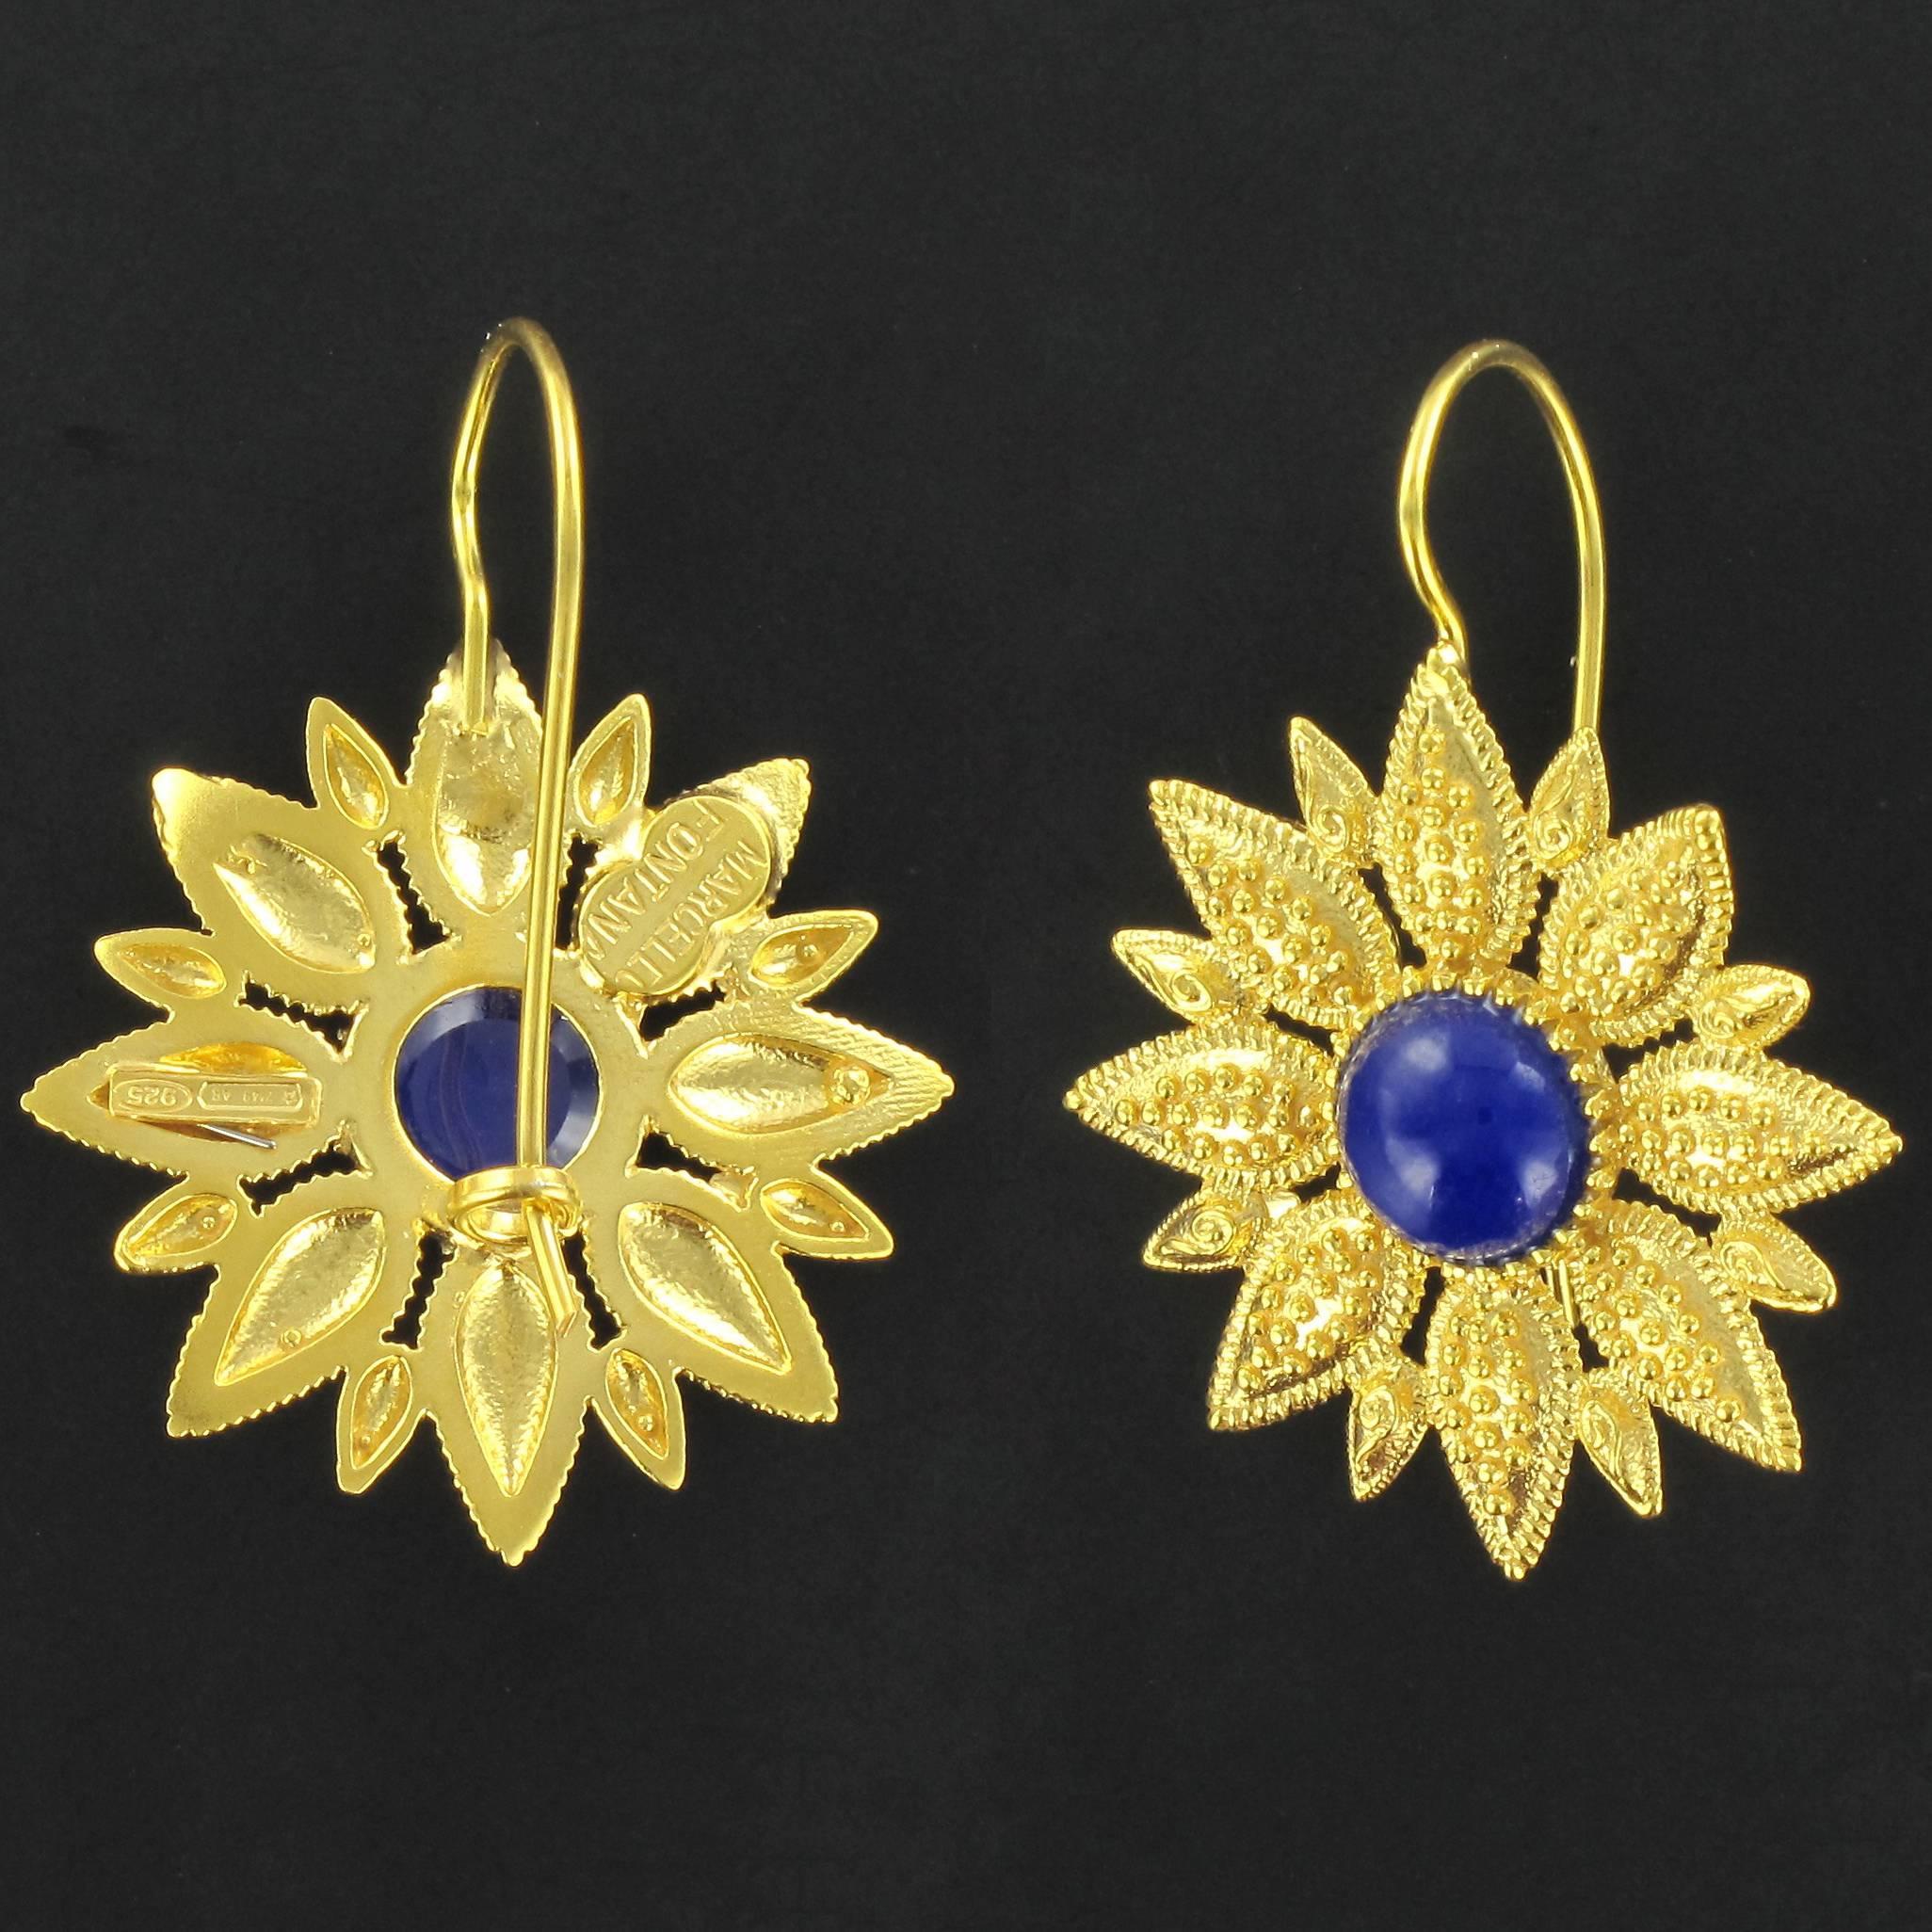 For pierced ears.
Pair of earrings in vermeil, silver and yellow gold.
Drop earrings are set by a cabochon of blue crystal. The clasps are goosenecks with safety hooks. 
Overall length: 3,6 cm, width to the widest: 2,7 cm, thickness to the widest: